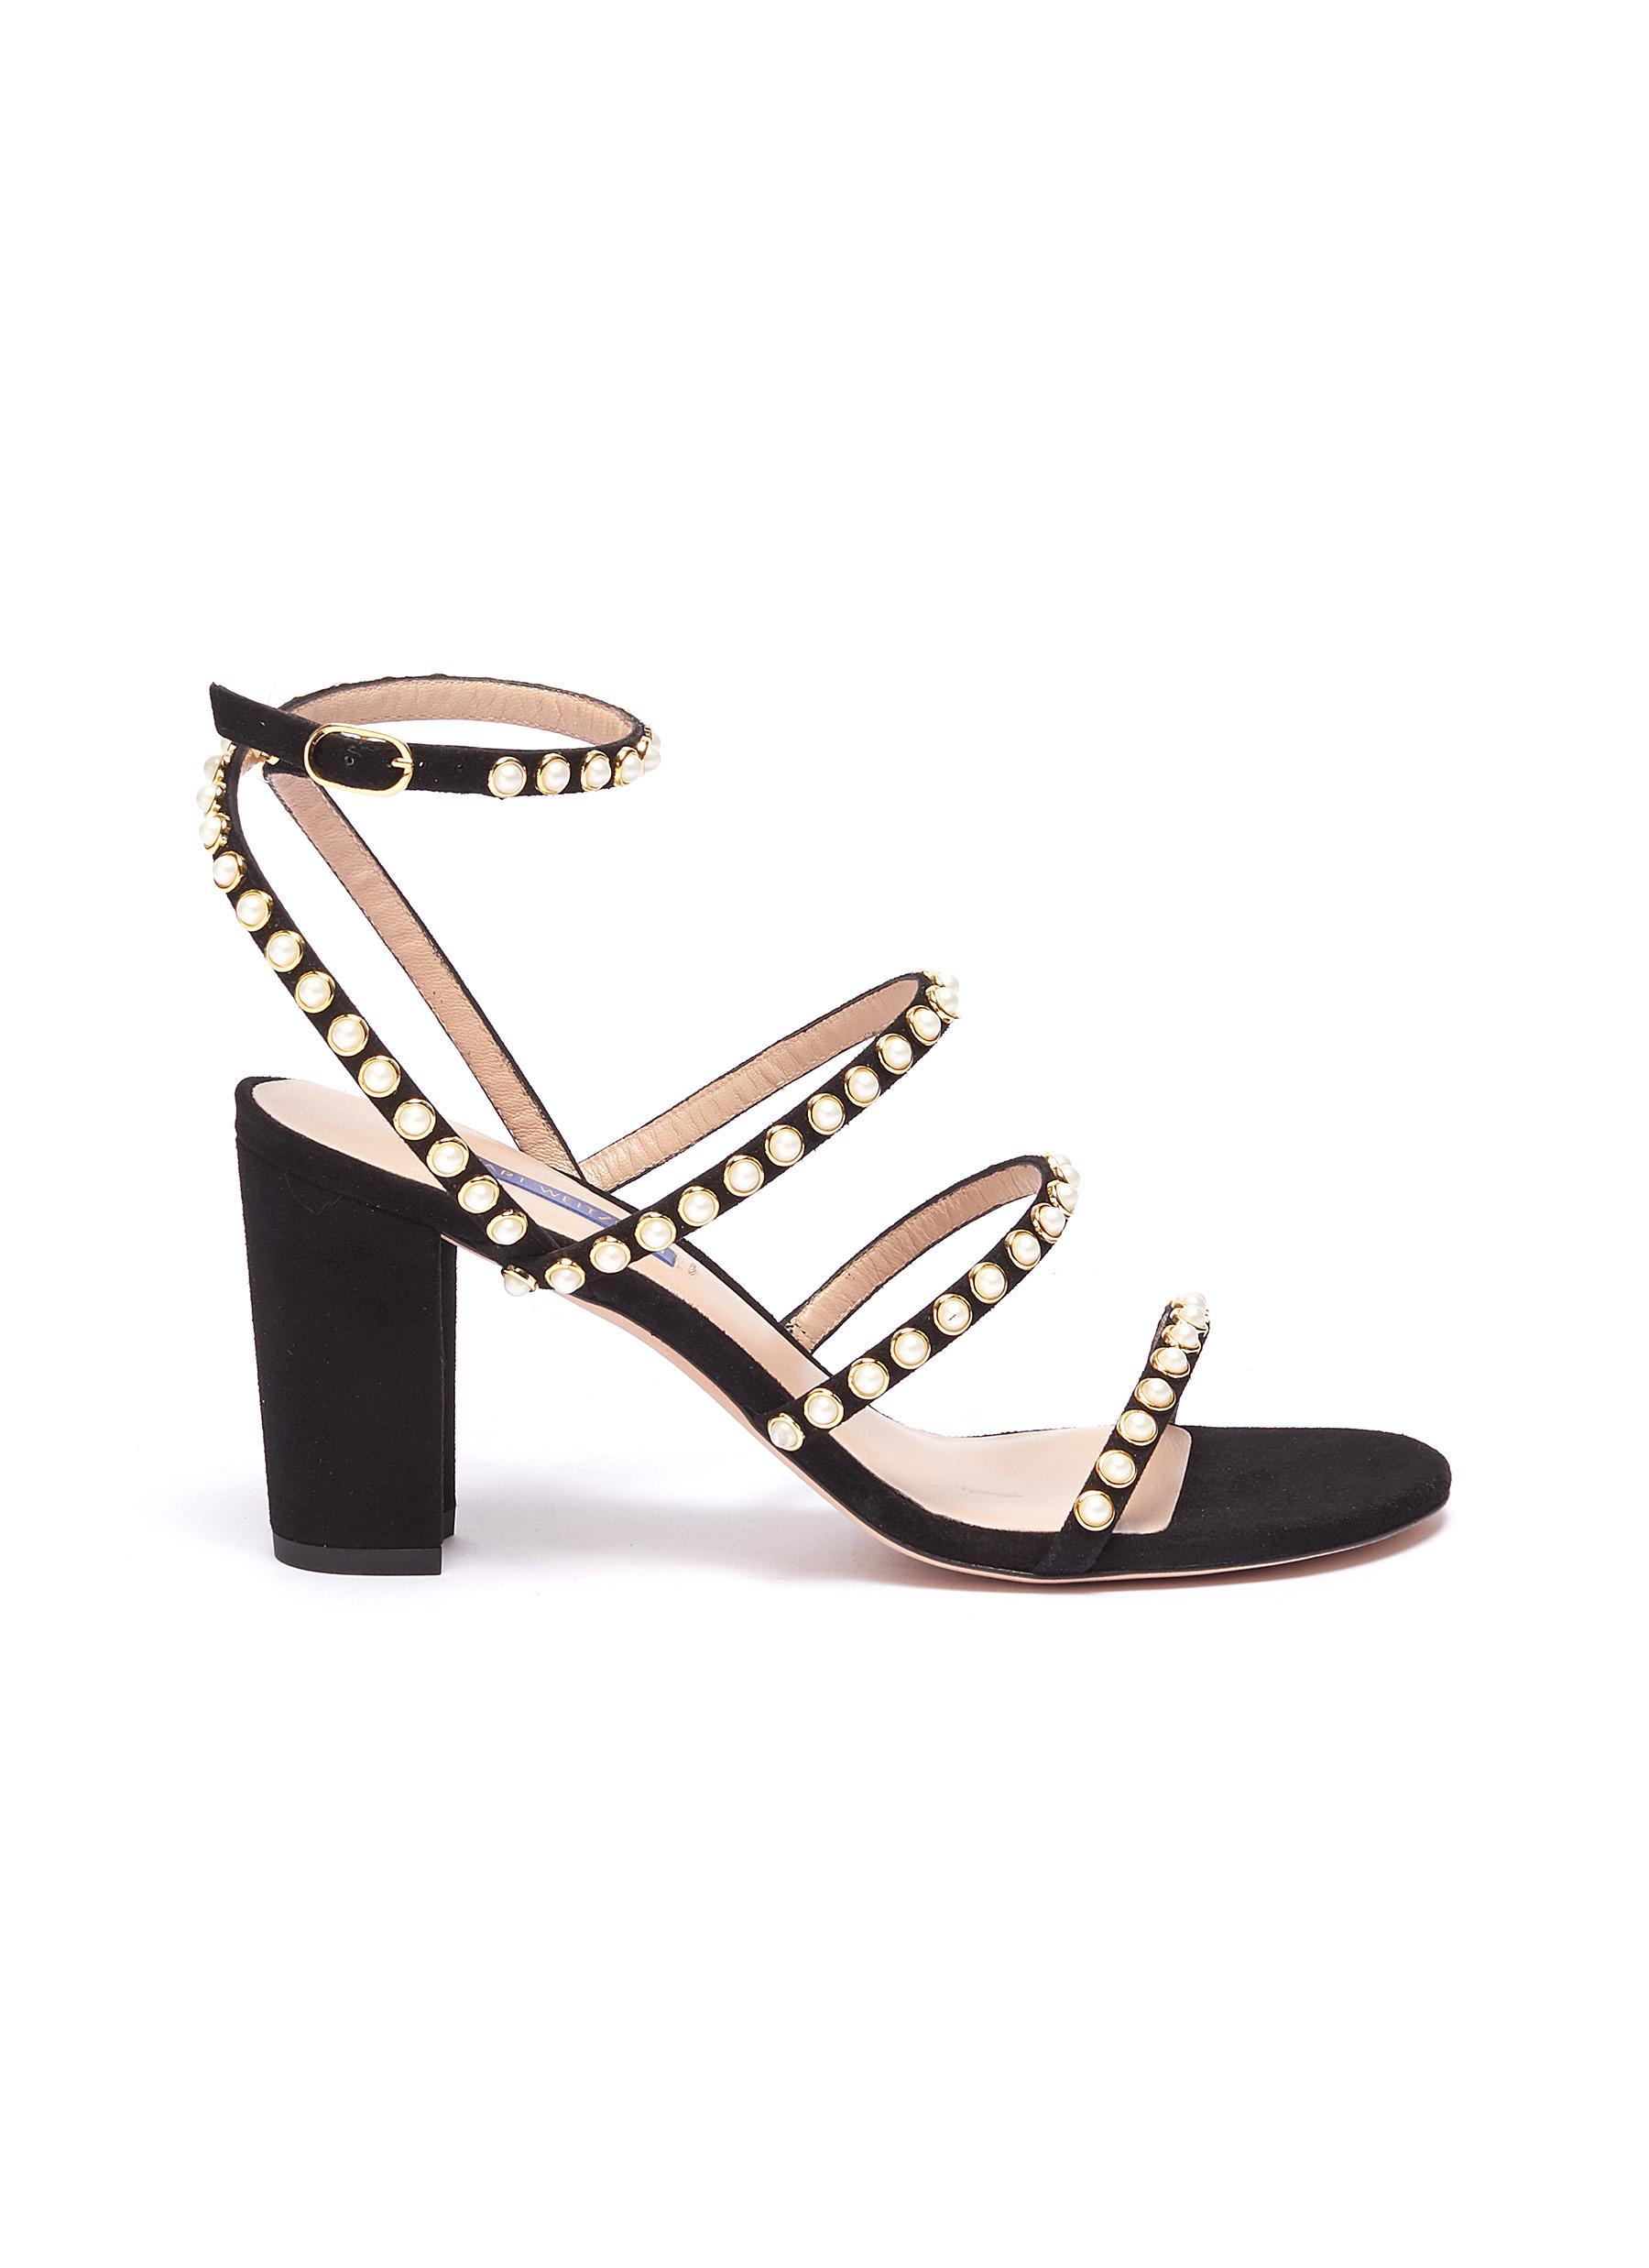 Stuart Weitzman 'perrine' Faux Pearl Strappy Suede Sandals